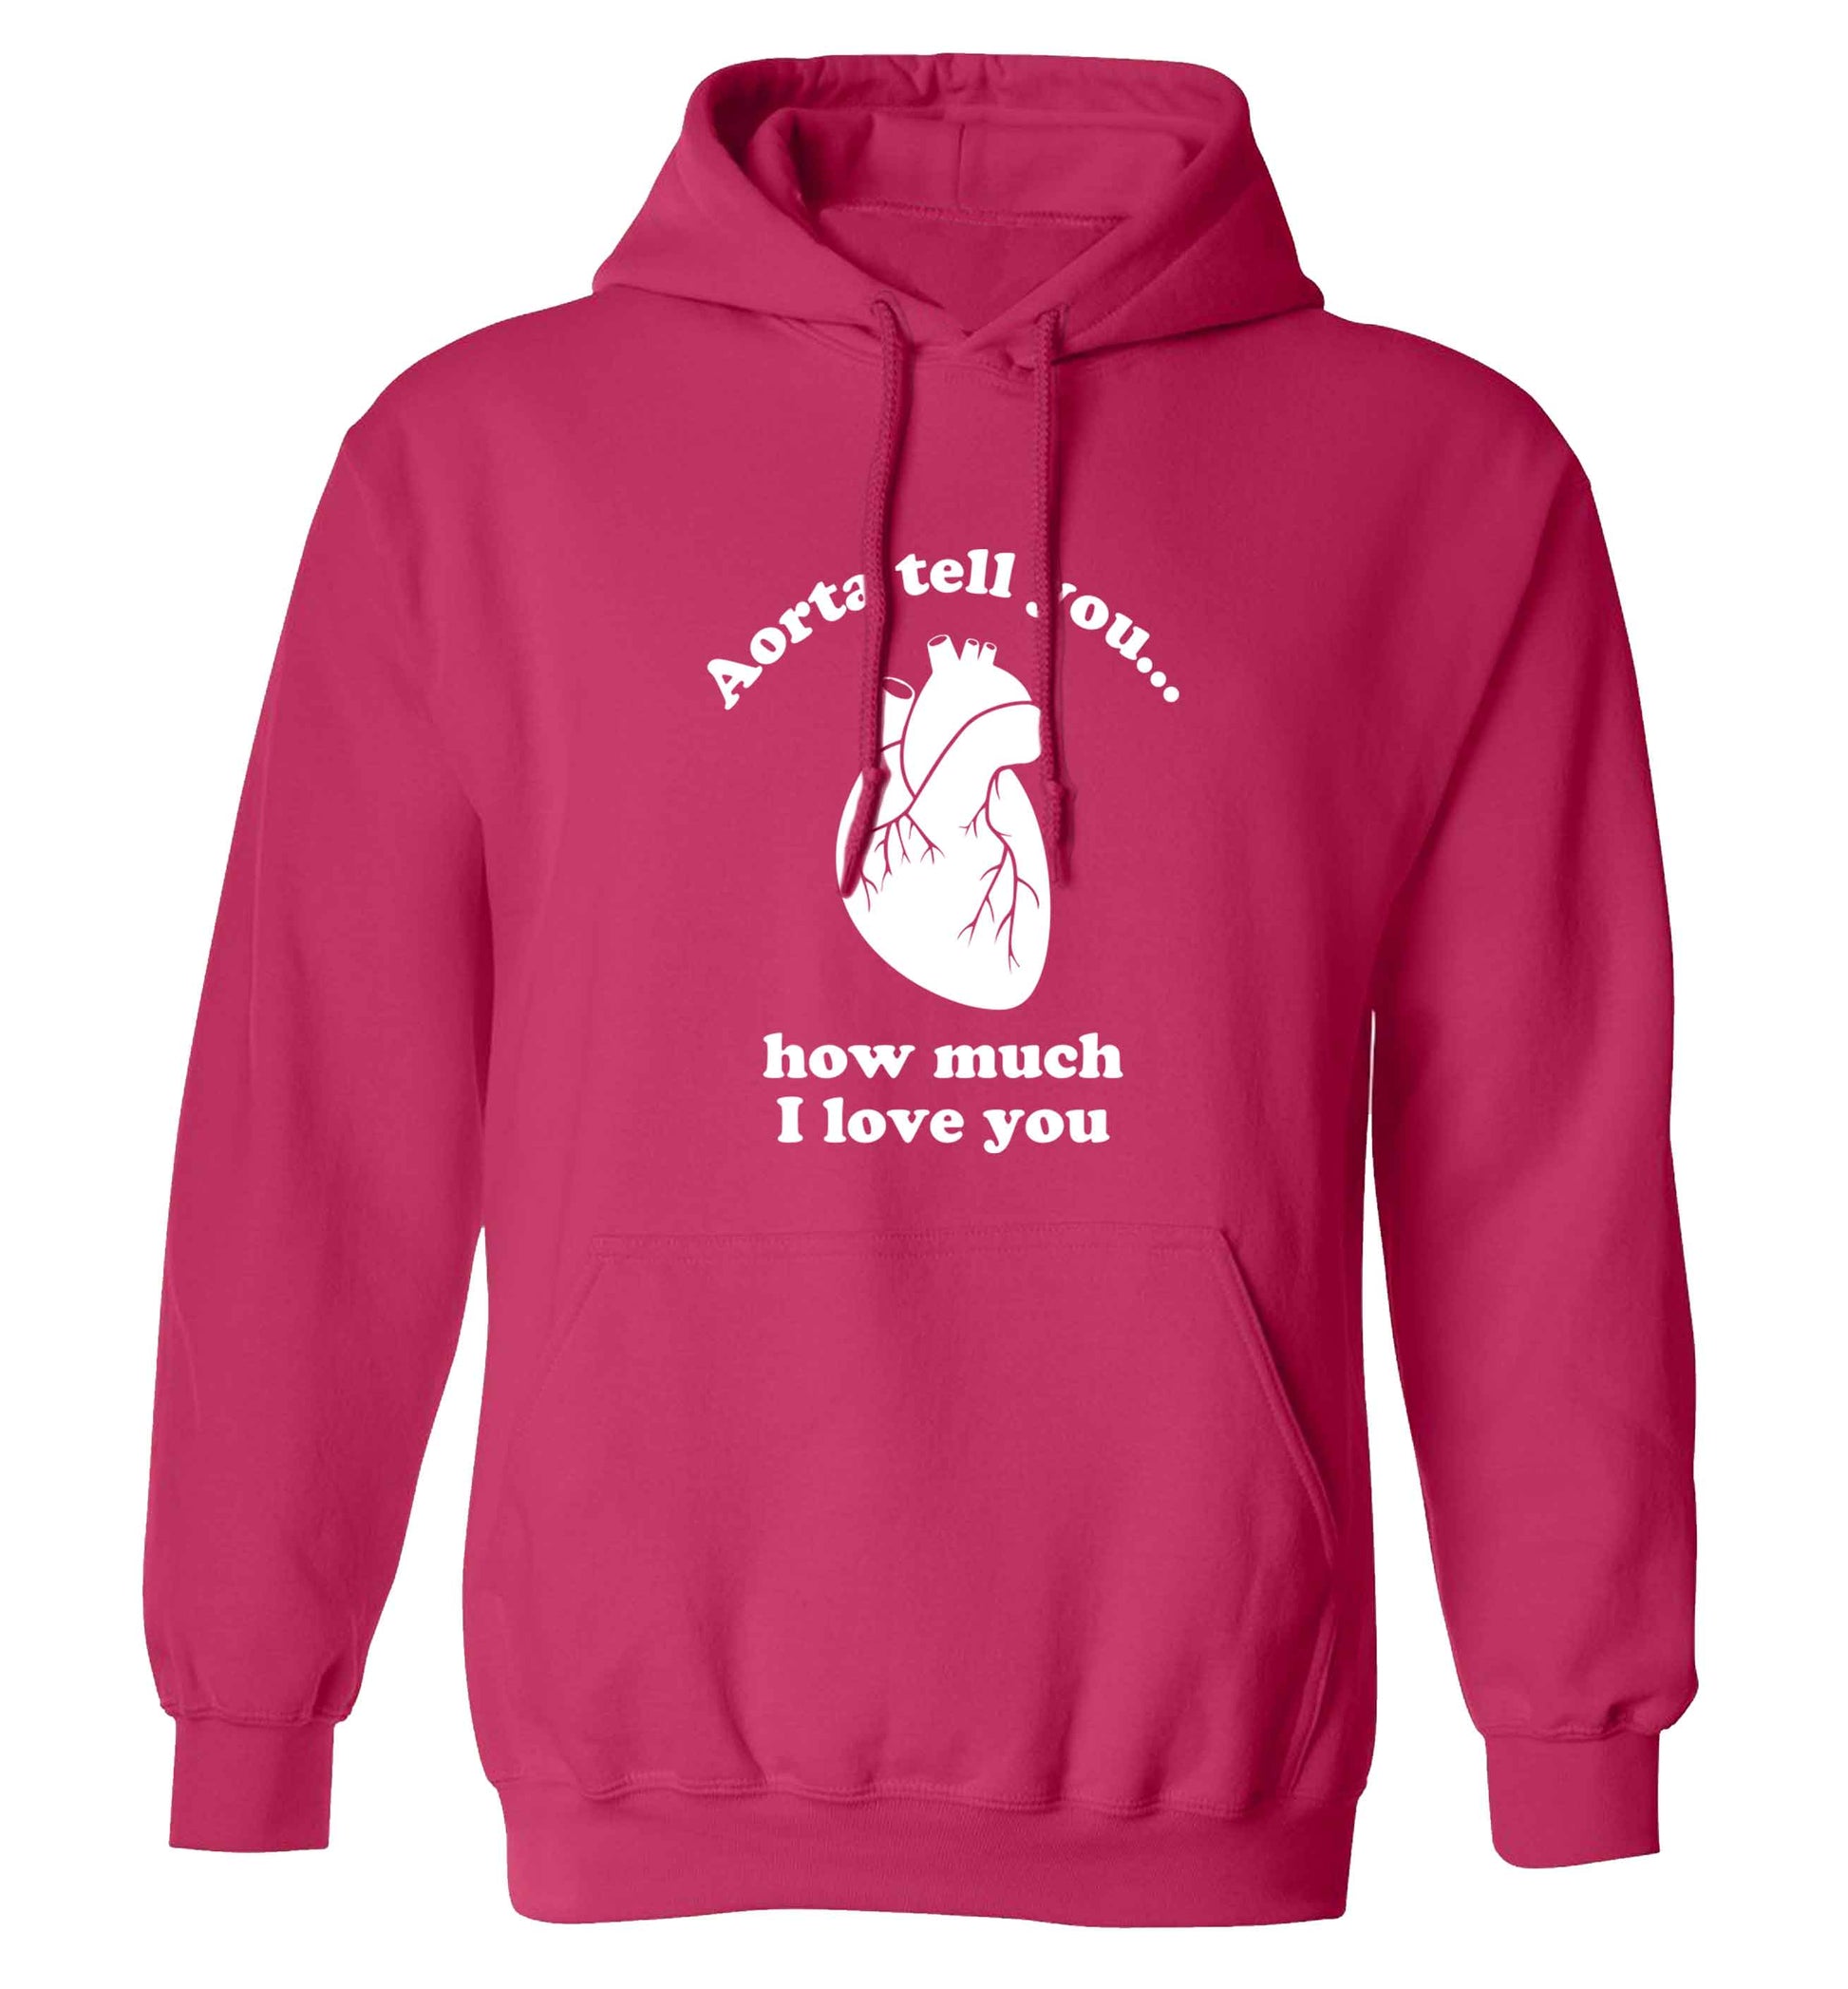 Aorta tell you how much I love you adults unisex pink hoodie 2XL